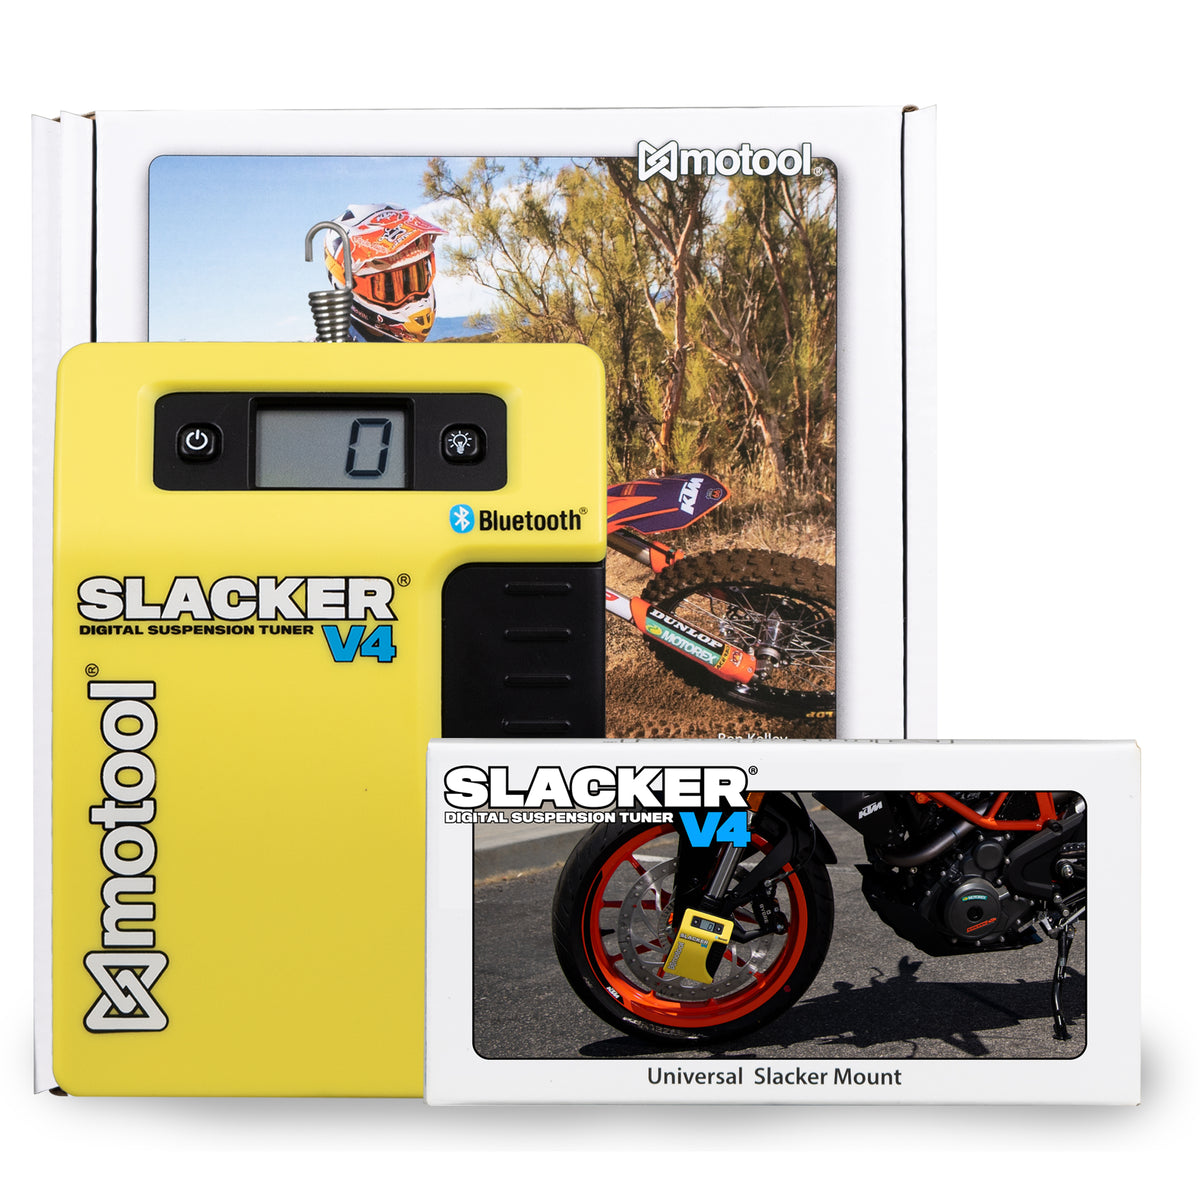 Slacker digital suspension tuner for setting sag on motorcycles and mountain bikes.